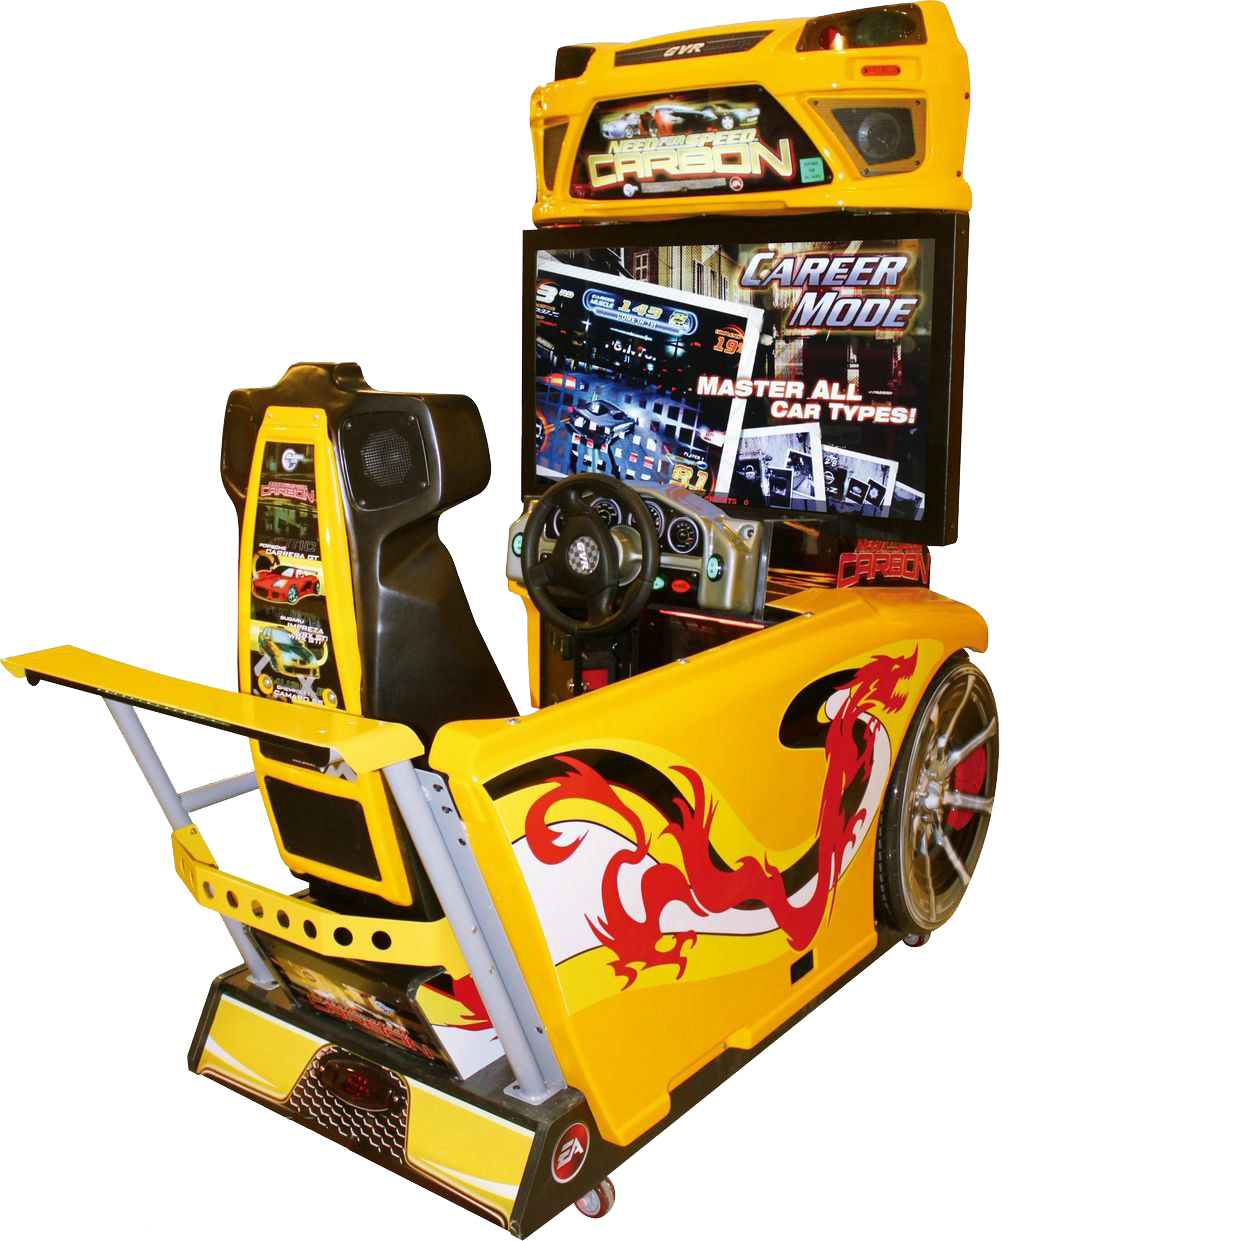 JinHui NFS need for speed simulator arcade coin operated dr